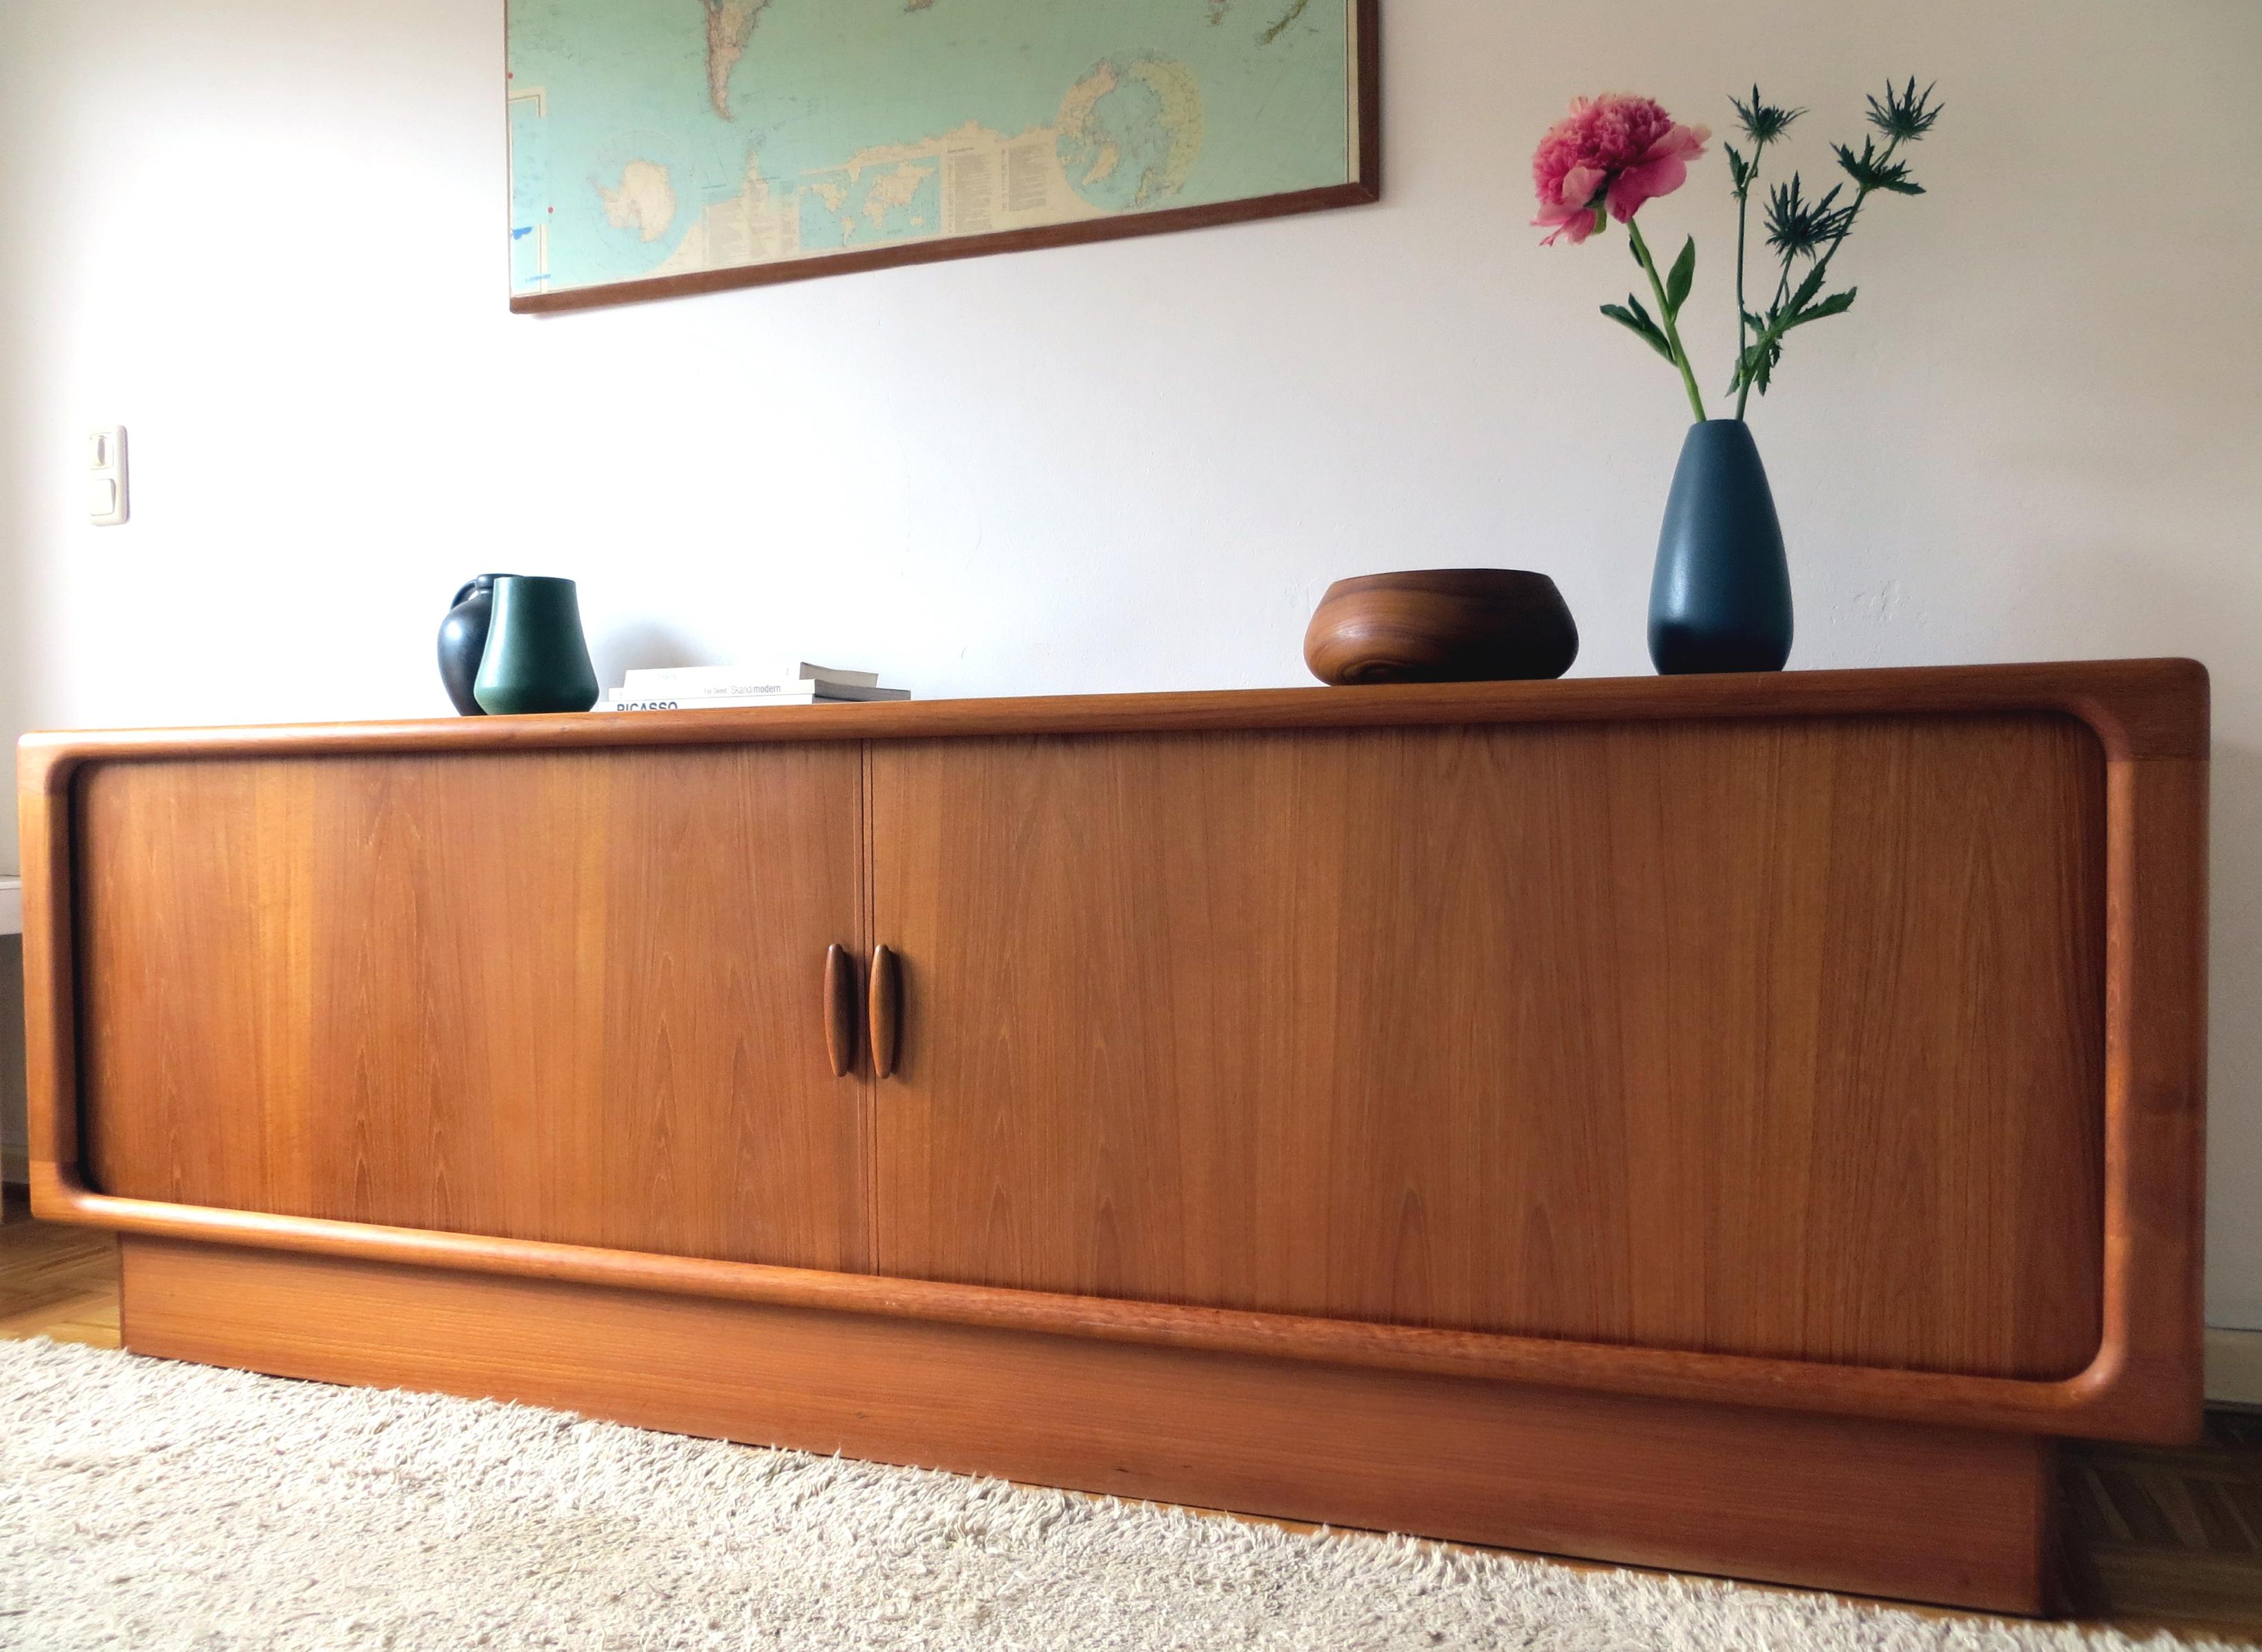 This Danish Scandinavian vintage jewel was designed in the early 1960s by Dyrlund in Denmark. This Dyrlund sideboard have the rare excess length from 87 inches.
The character of this design is clean with sculptural lines in typical highest Dyrlund